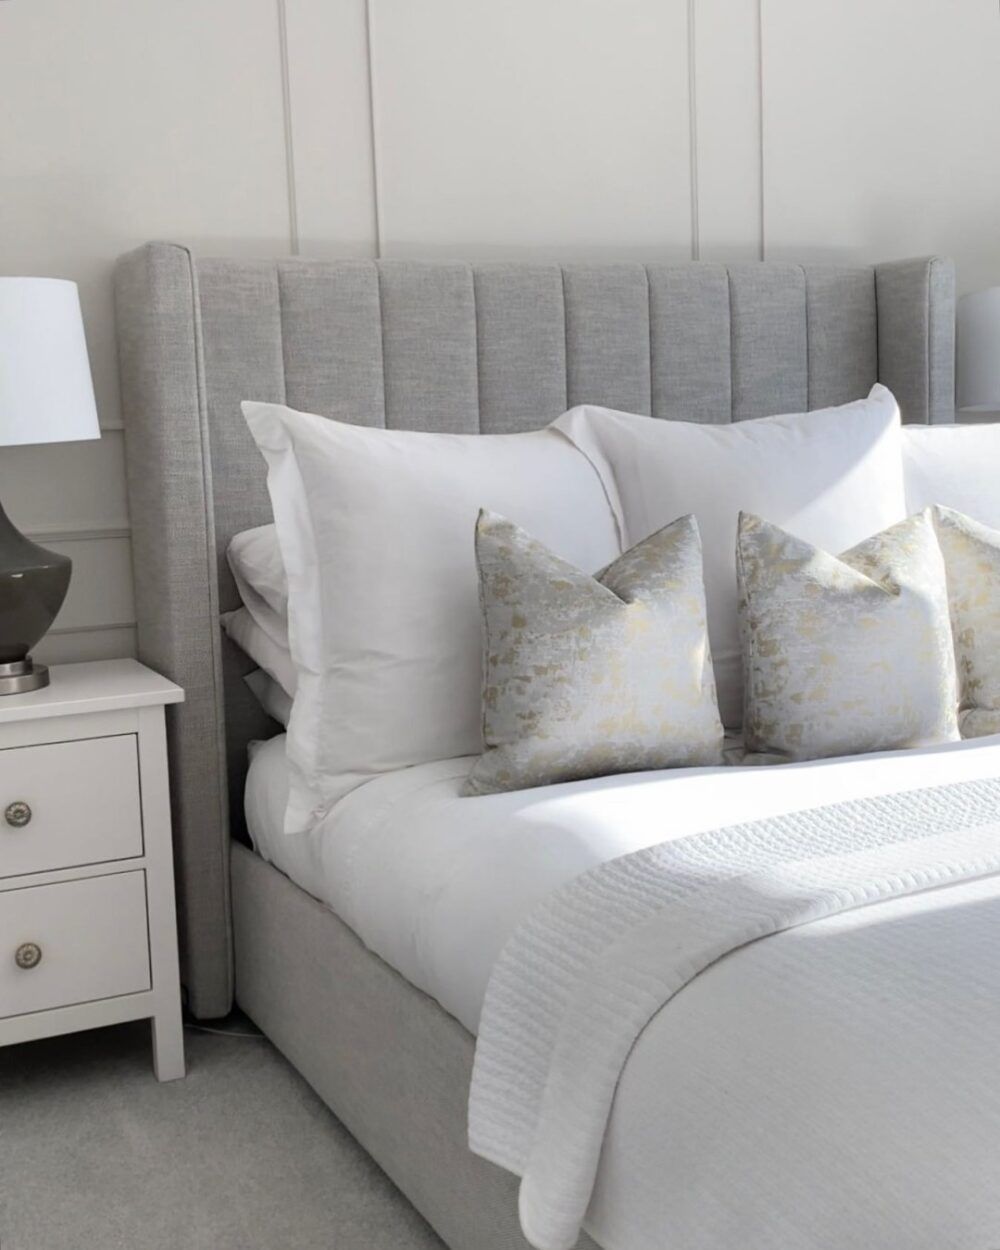 A grey upholstered bed frame, styled with white bedding